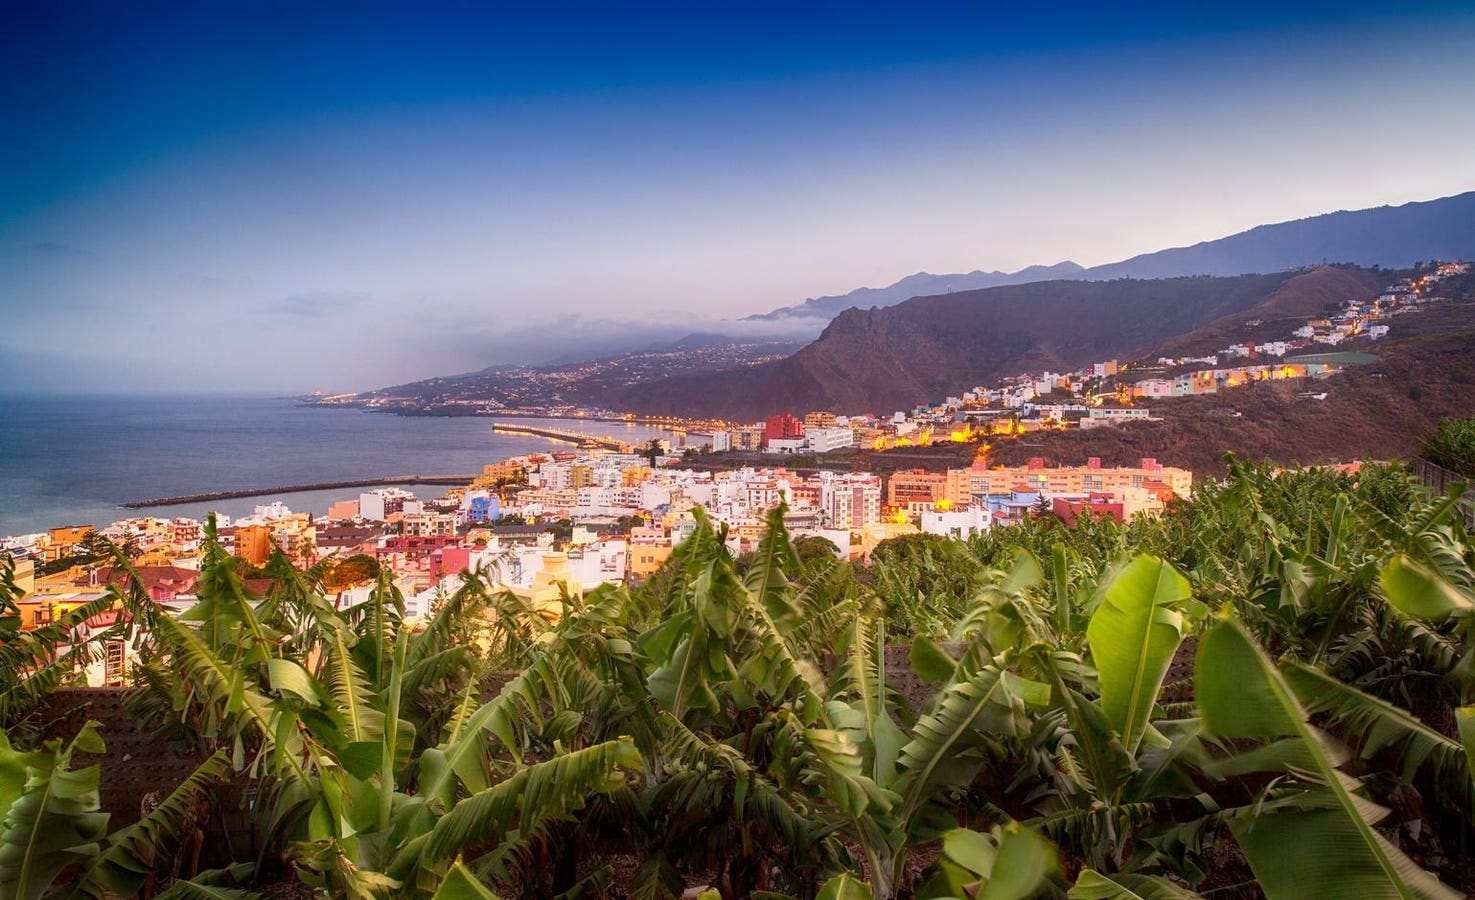 La Palma: The Green Canary Island Where Nature Takes Center Stage